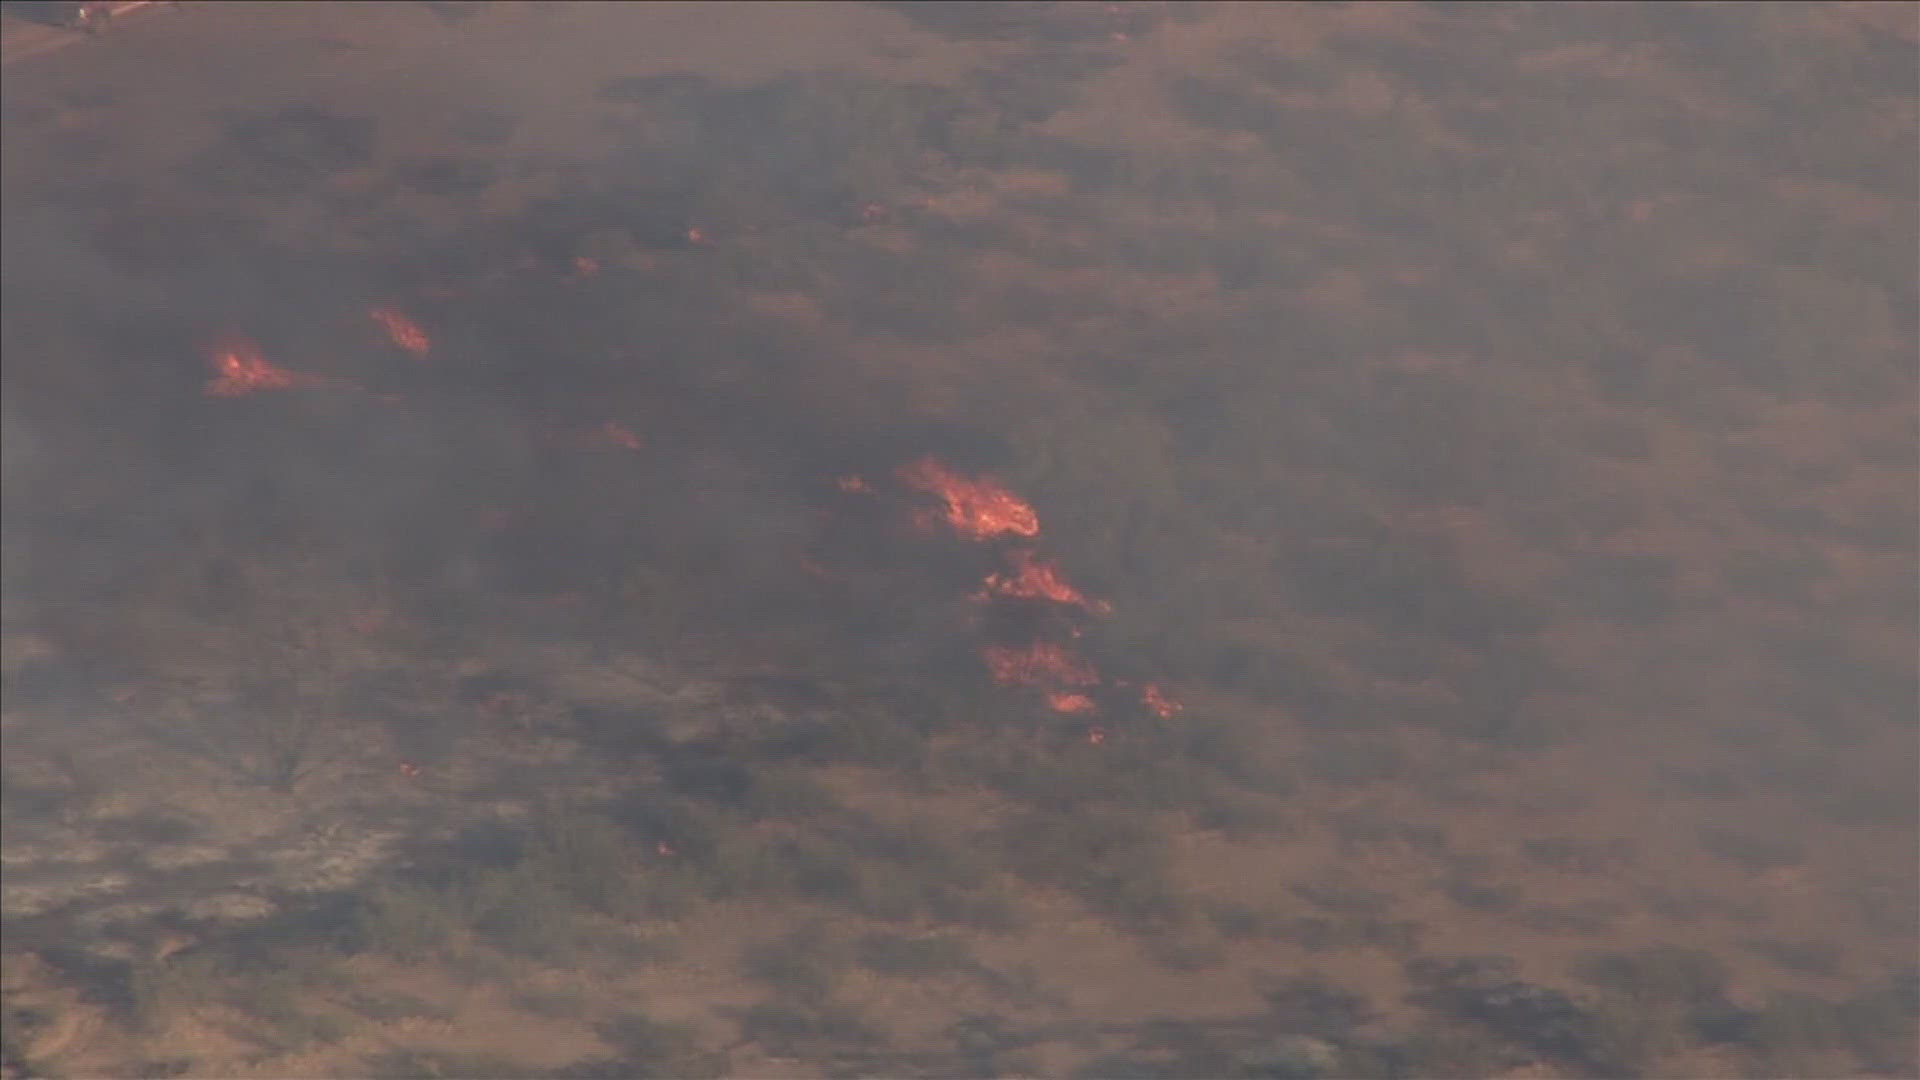 12News is tracking several wildfires across Arizona.